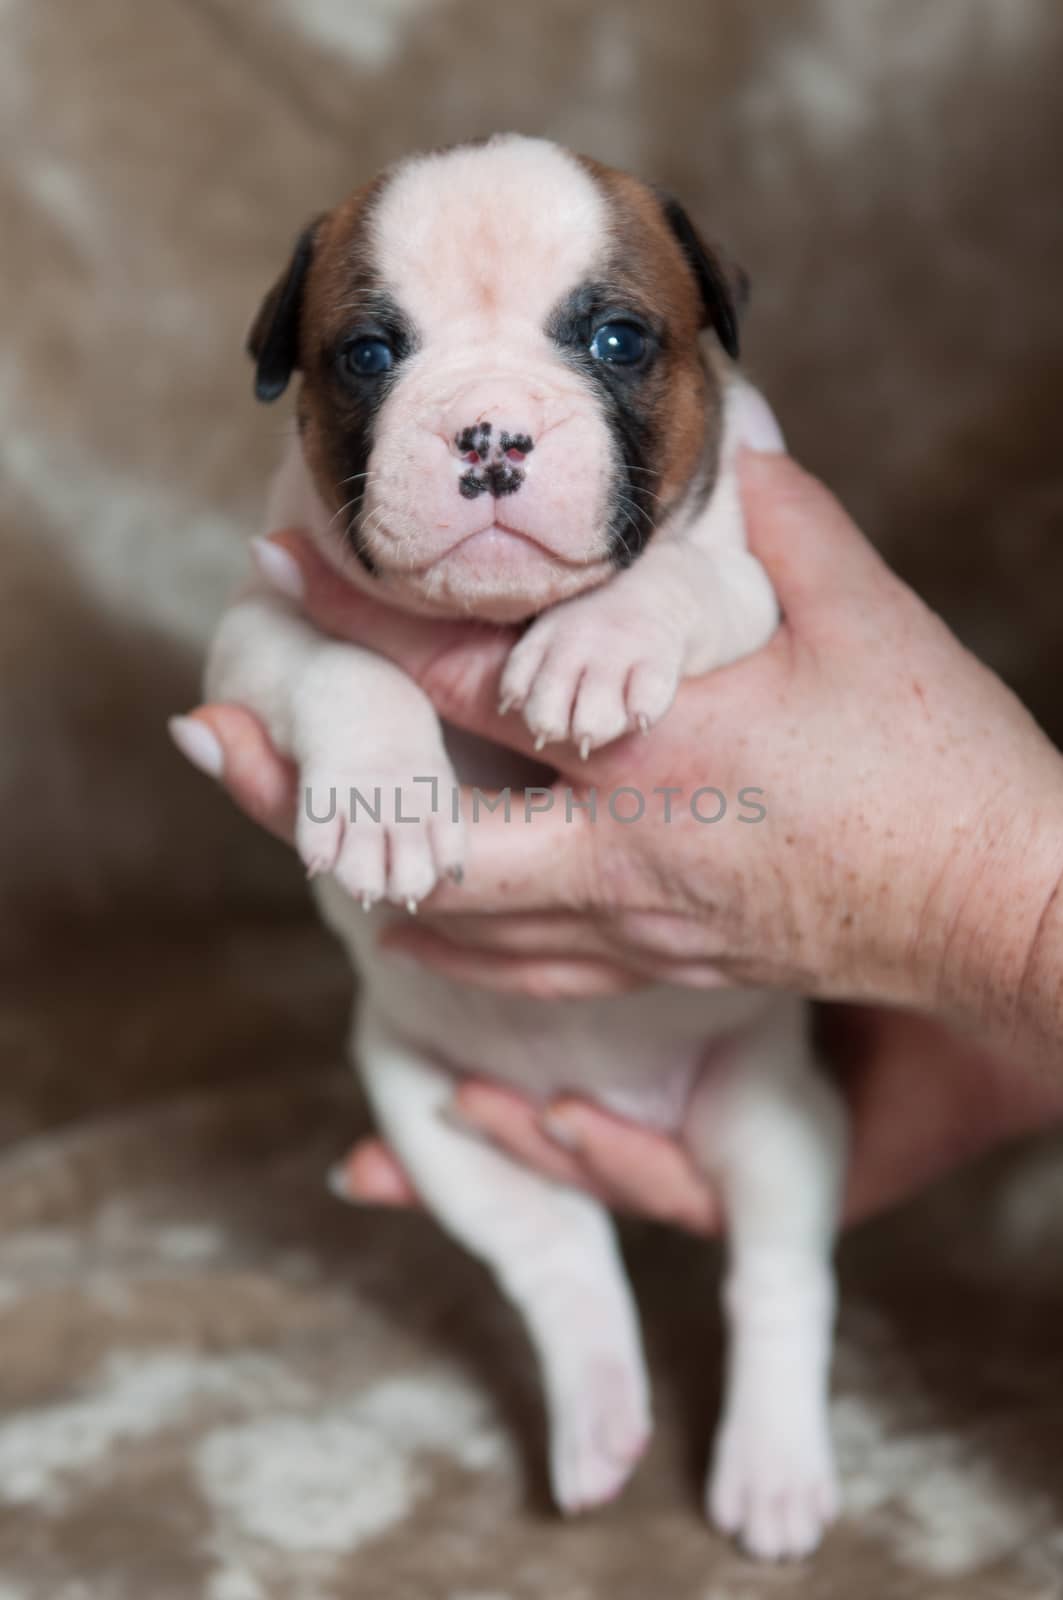 Small American Bulldog puppy on hands on light background